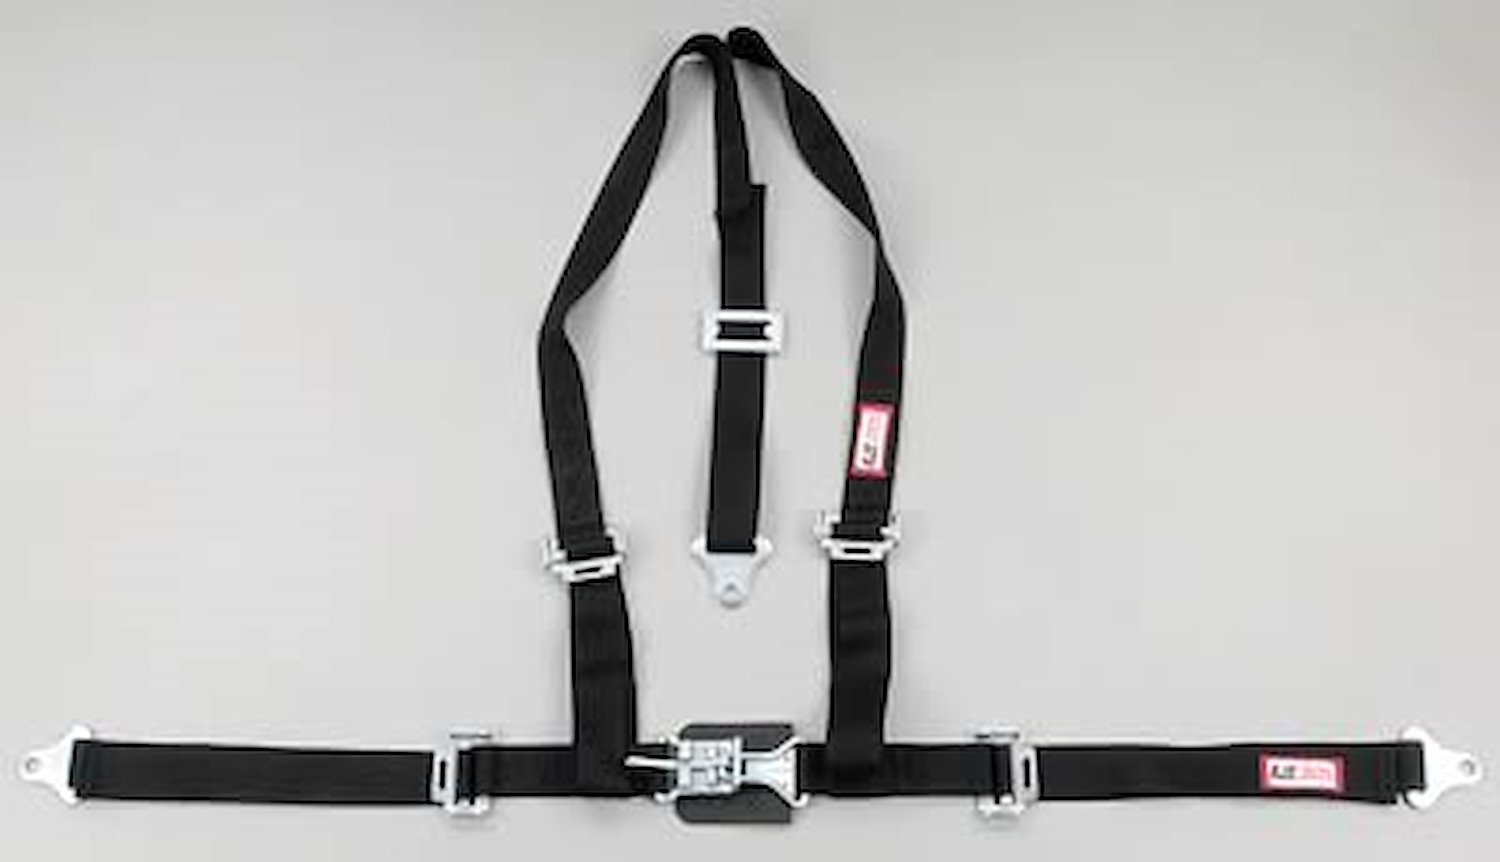 NON-SFI L&L HARNESS 2 PULL UP Lap Belt SNAP SEWN IN 2 S.H. INDIVIDUAL FLOOR Mount WRAP/BOLT YELLOW